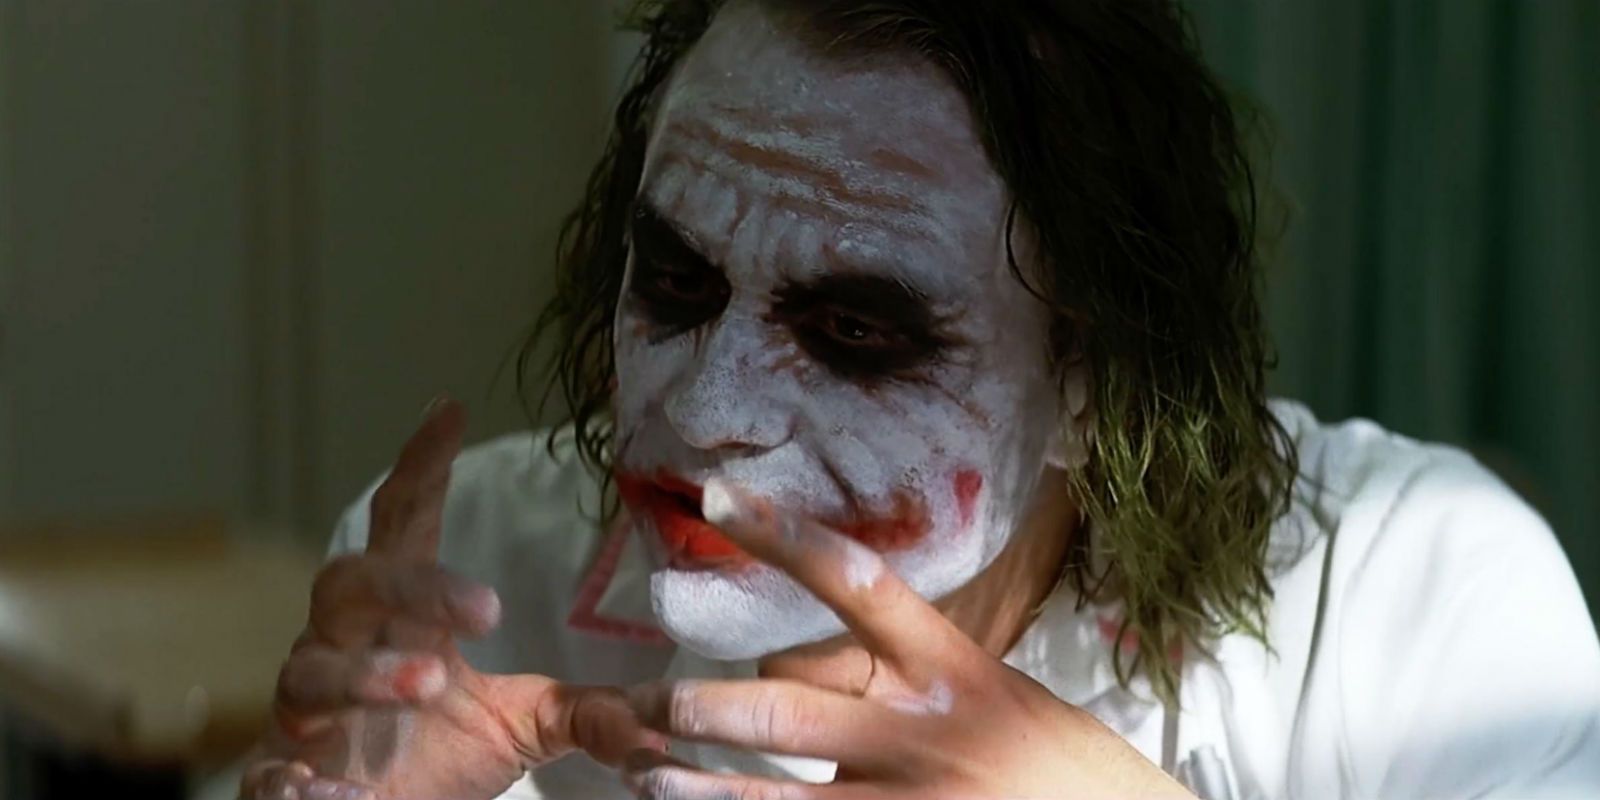 The Dark Knight: Why Didn’t Harvey Dent Recognize The Joker?